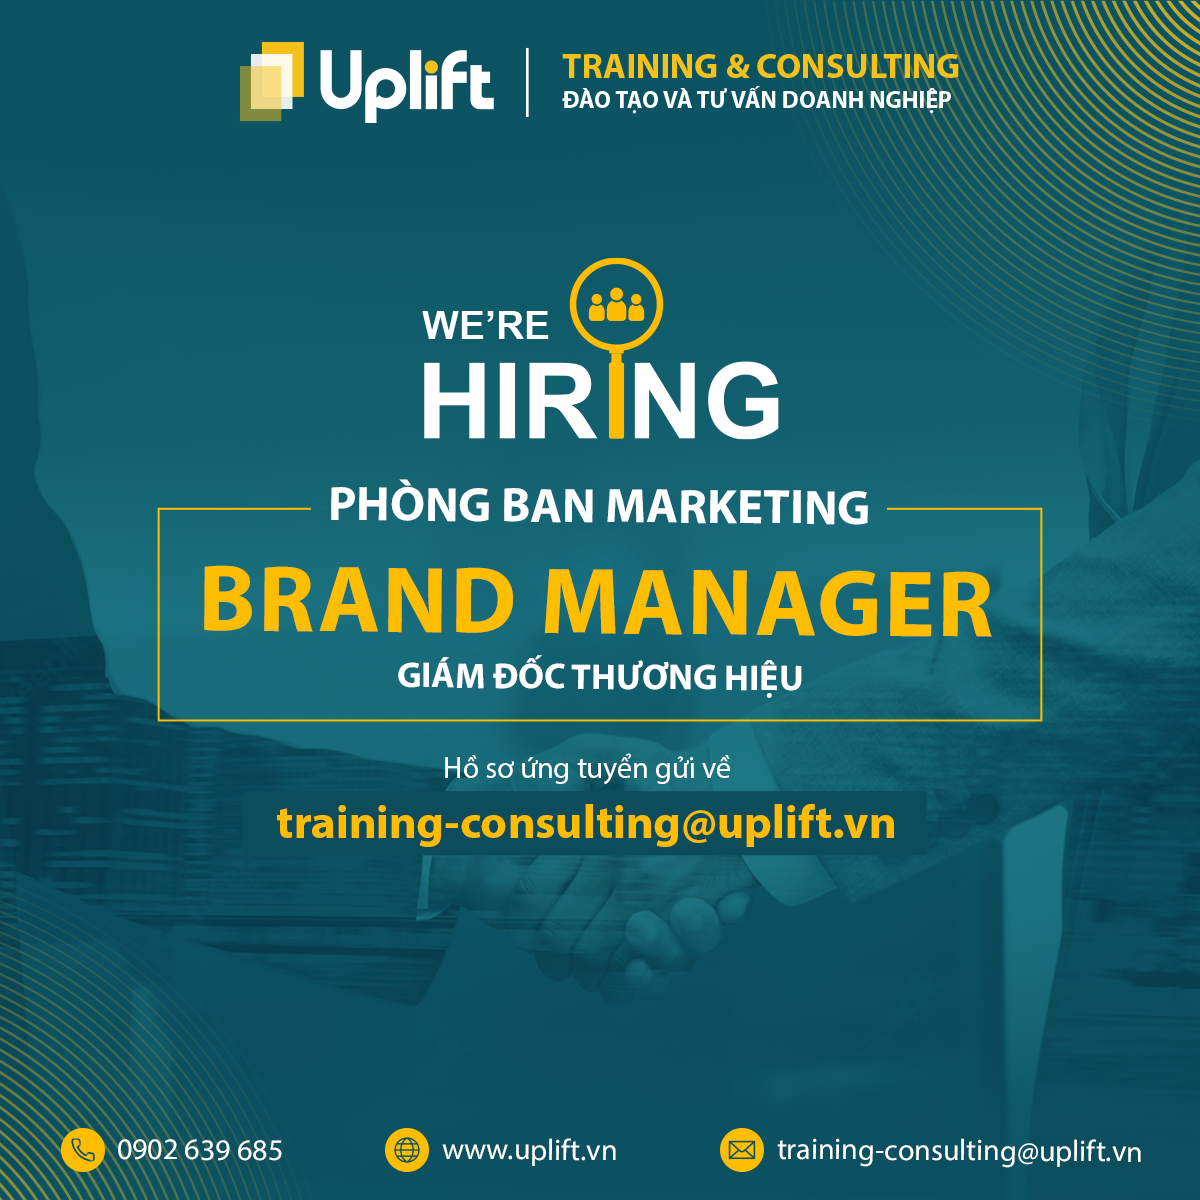 TUYỂN DỤNG BRAND MANAGER